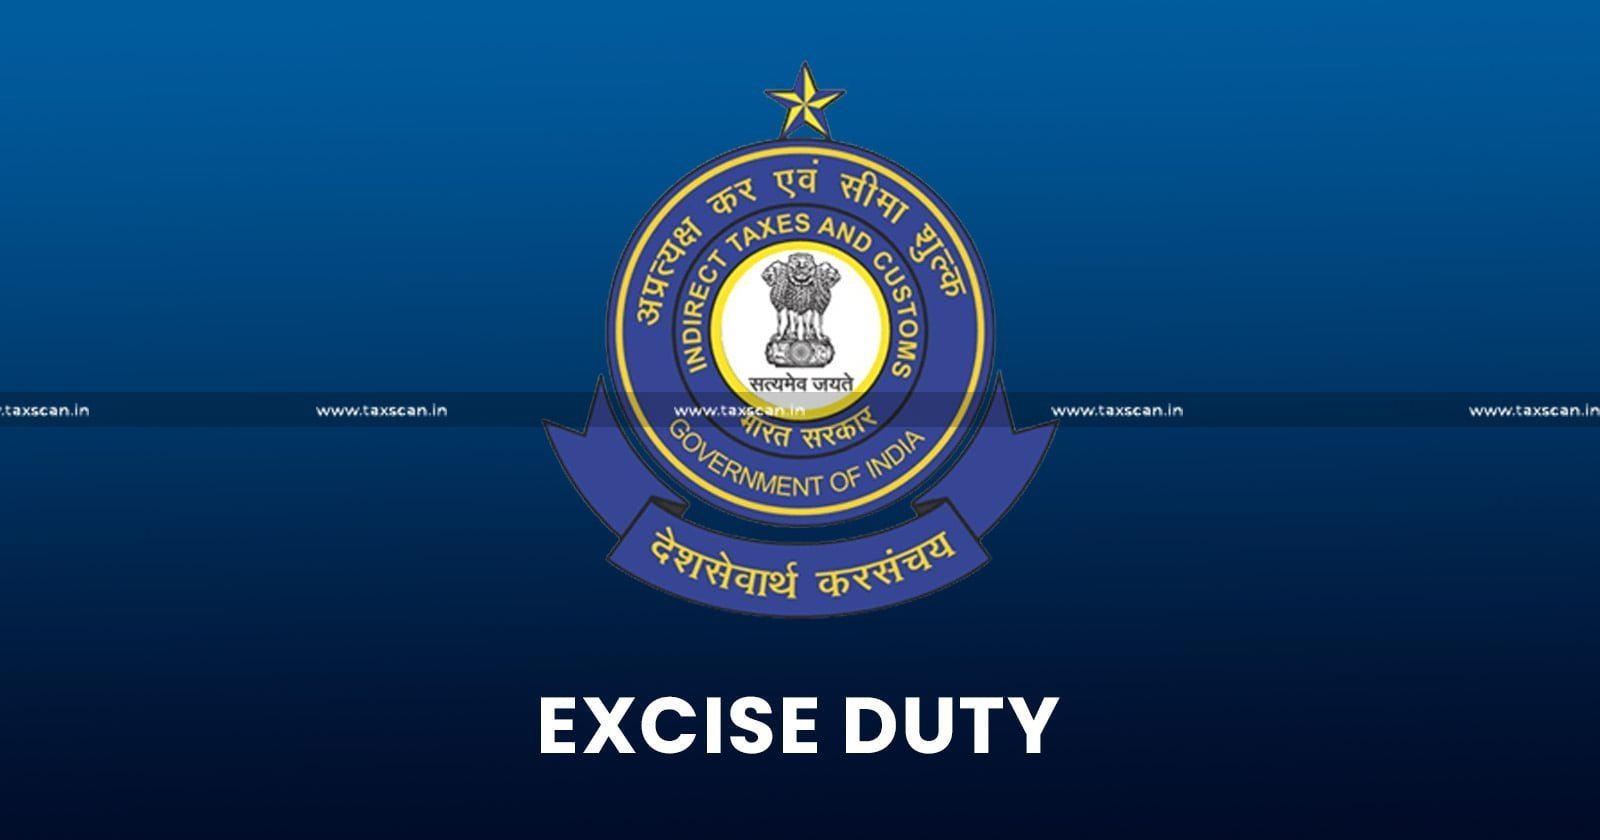 Excise Duty - Excise Duty Levy on Gutkha - Central Excise Act - Excise - taxscan